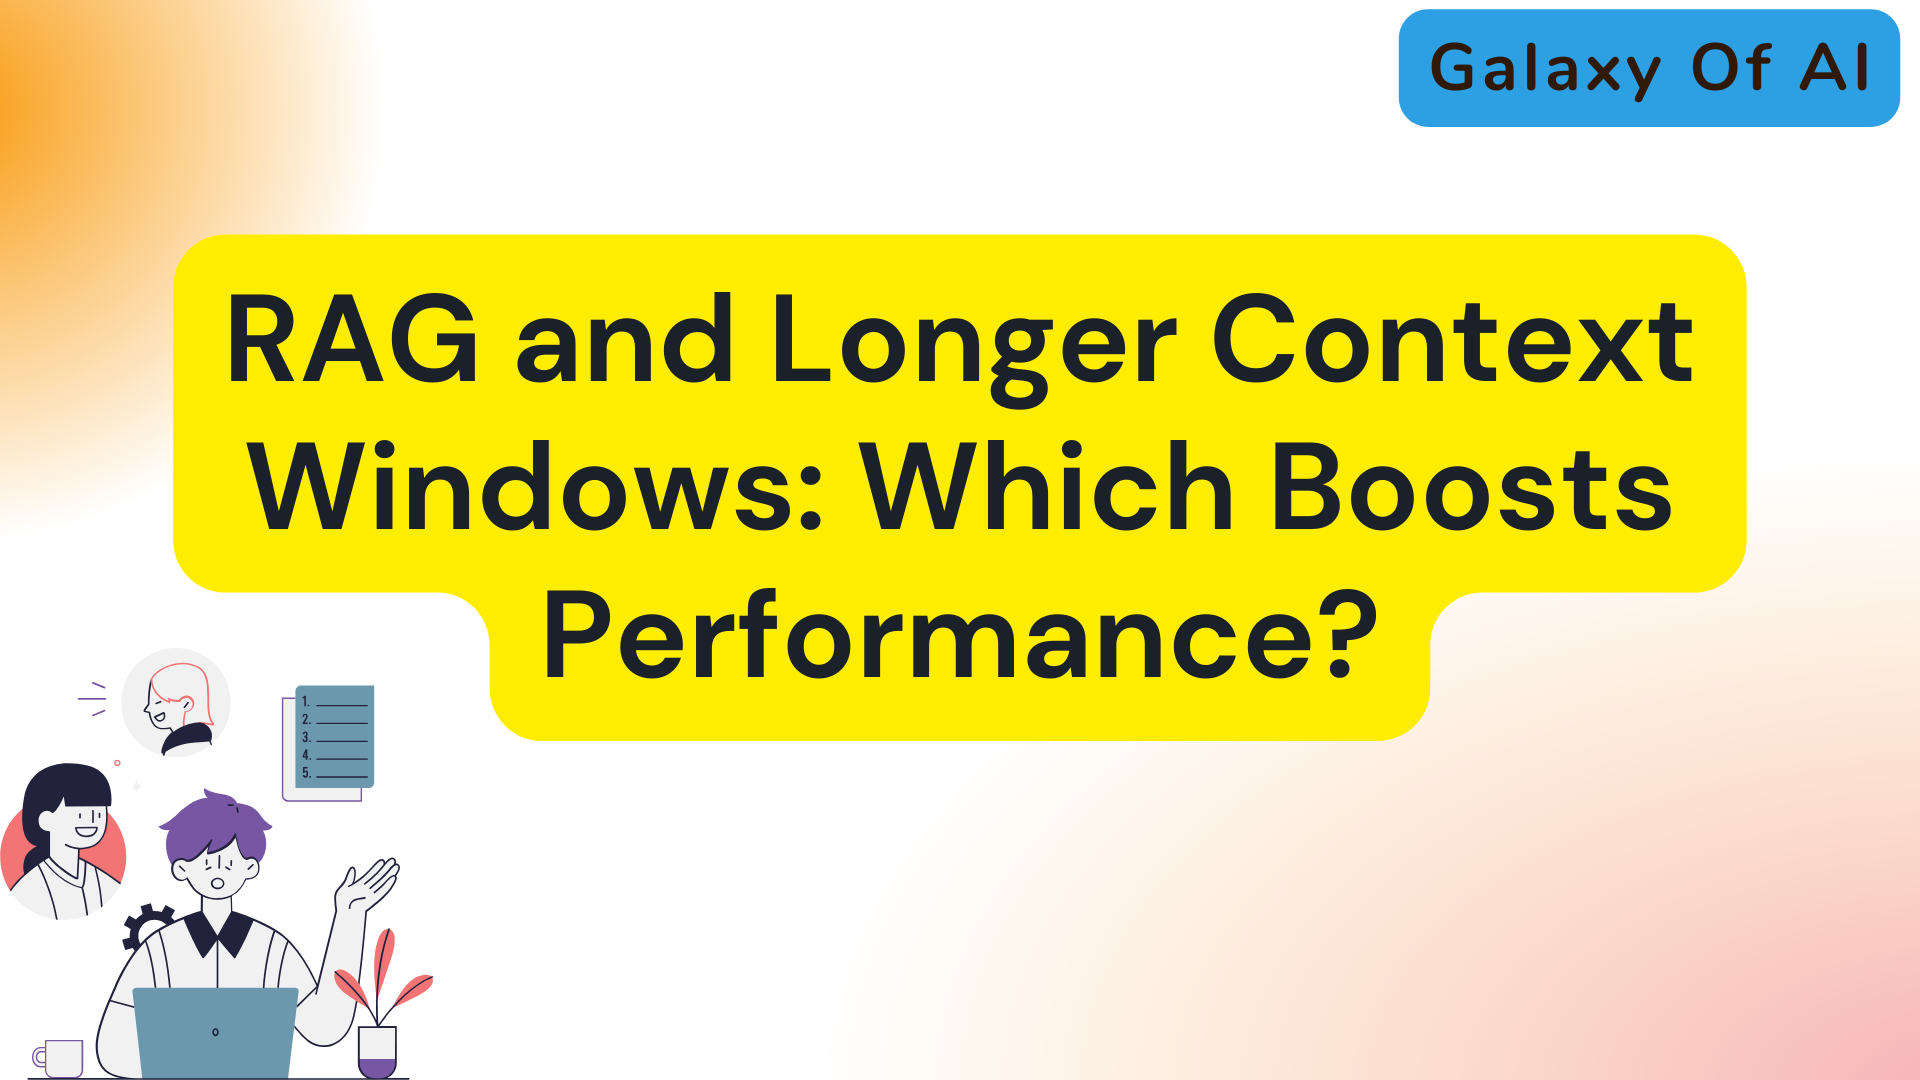 RAG and Longer Context Windows: Which Boosts Performance?